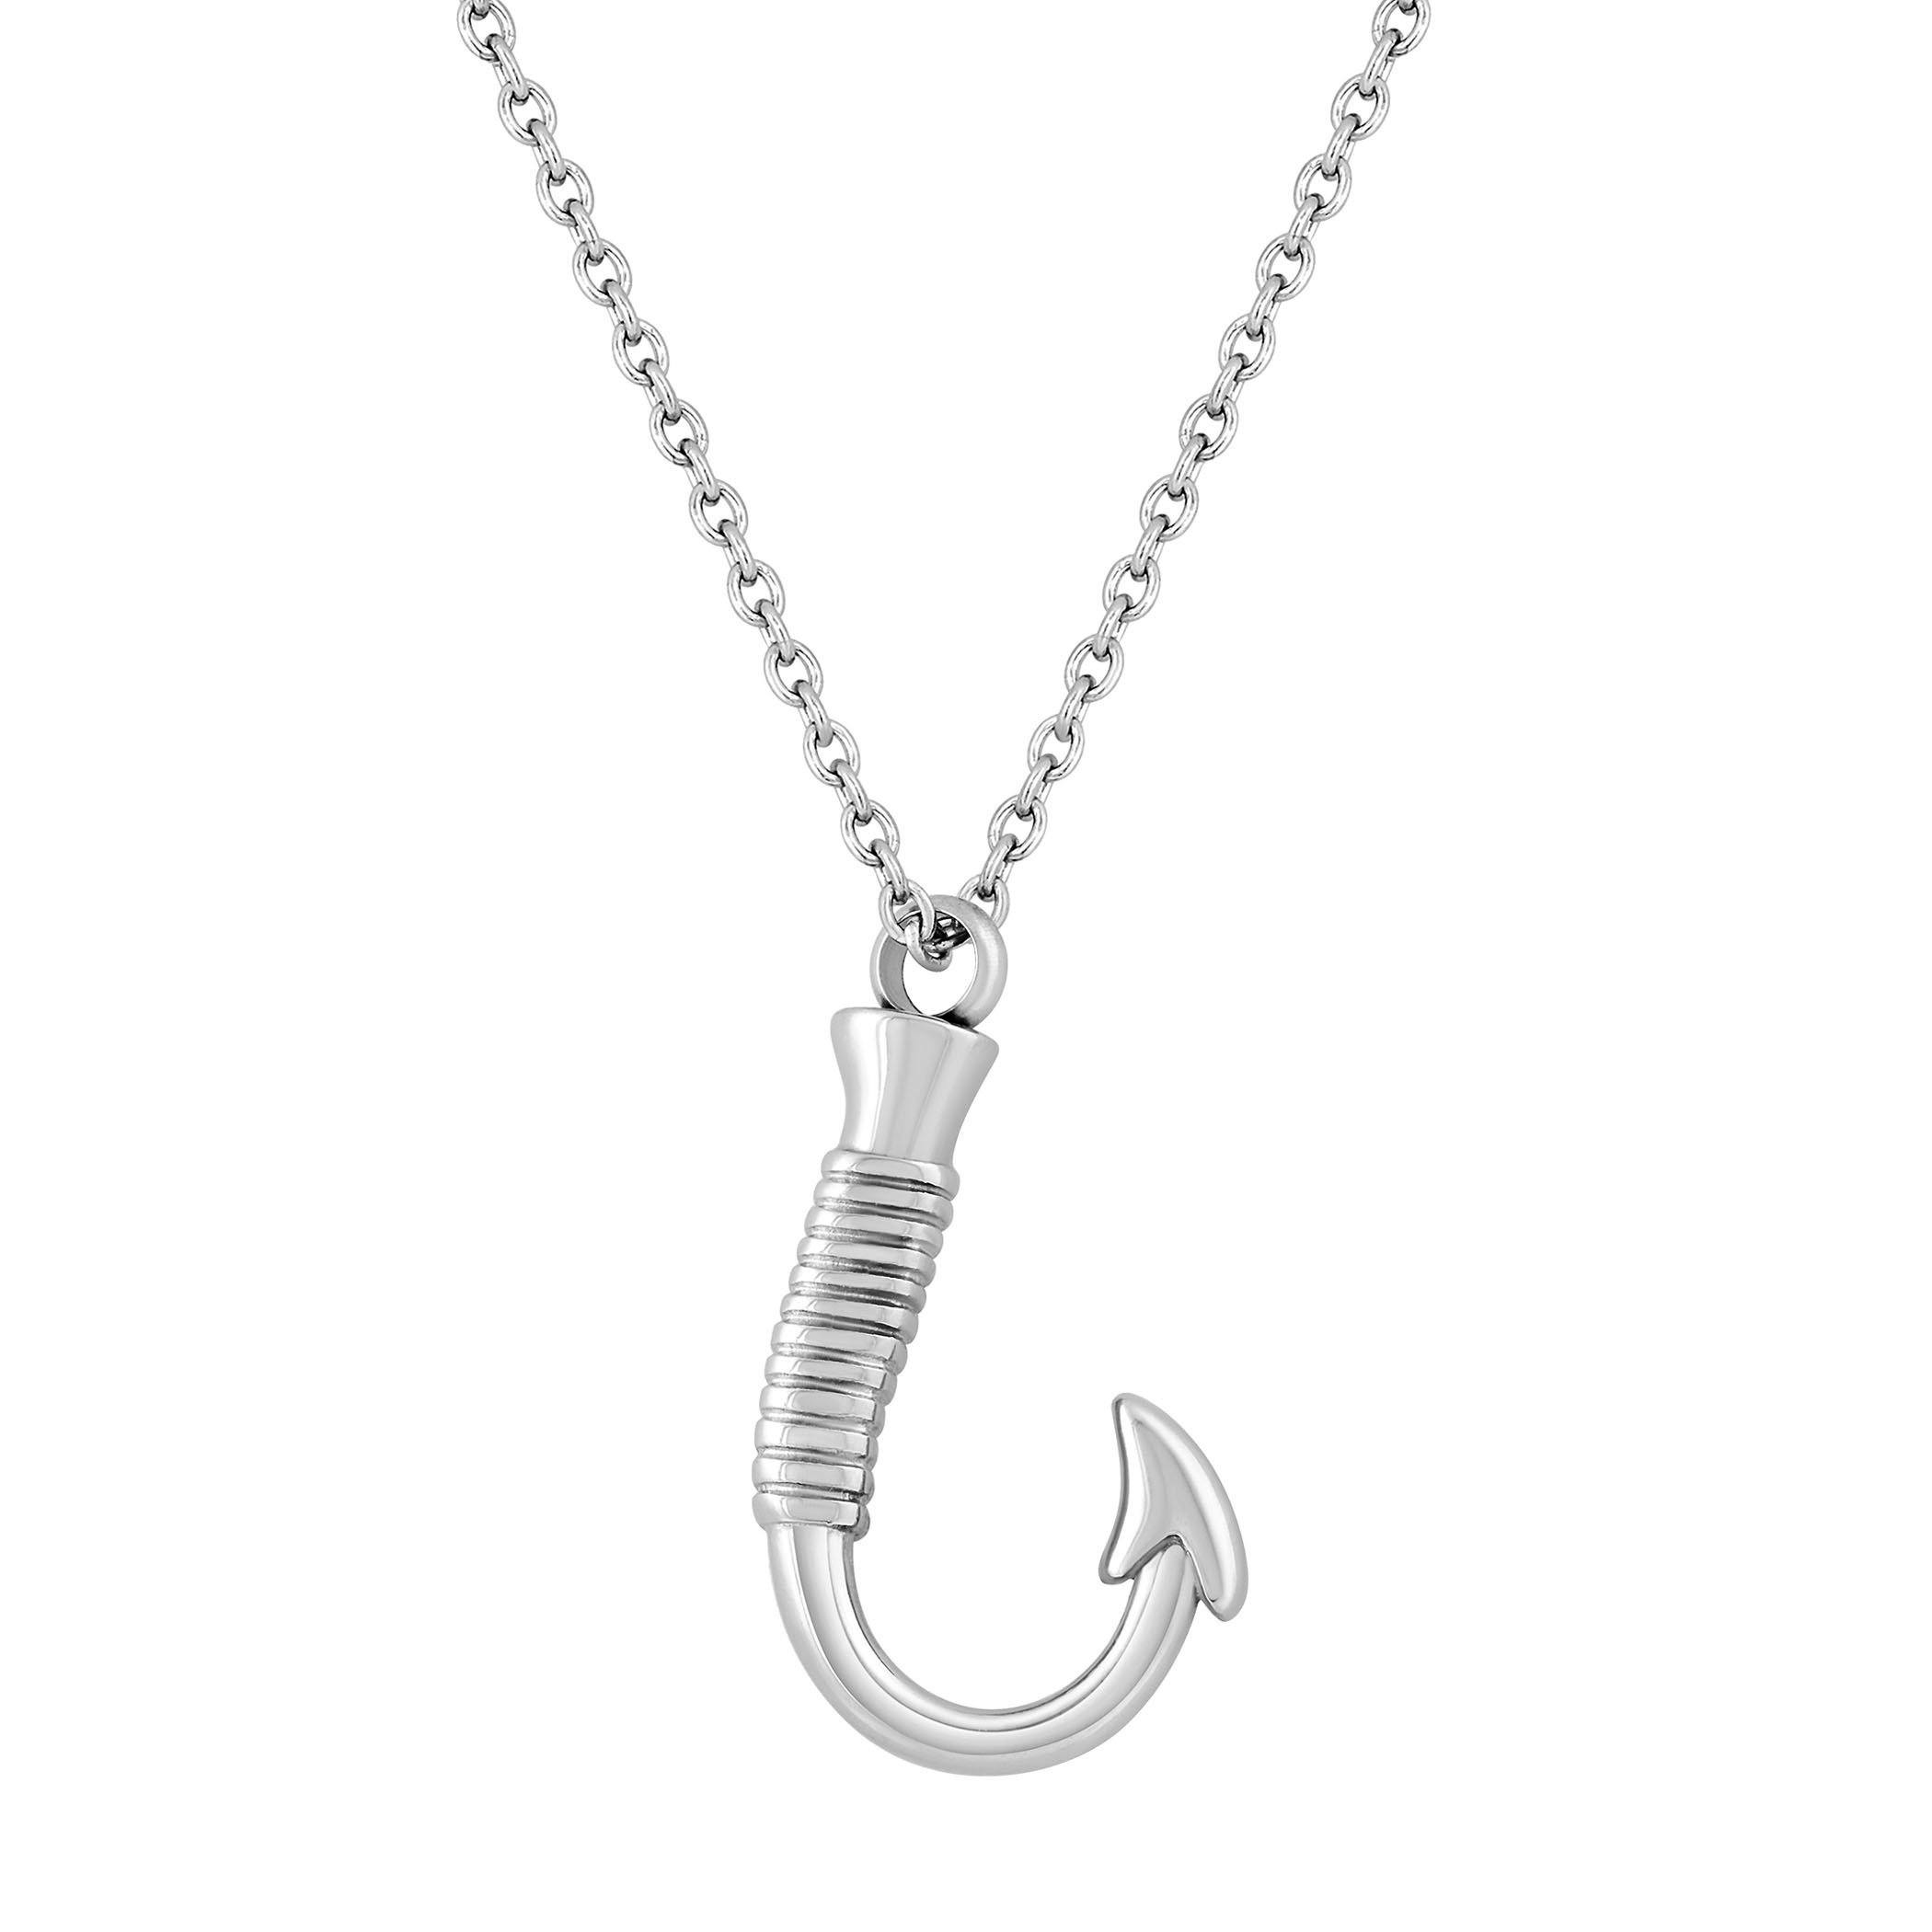 Fishing Hook Cremation Jewelry | Necklace for Ashes | Urn Necklaces | Cremation Jewelry | Cremation Necklace